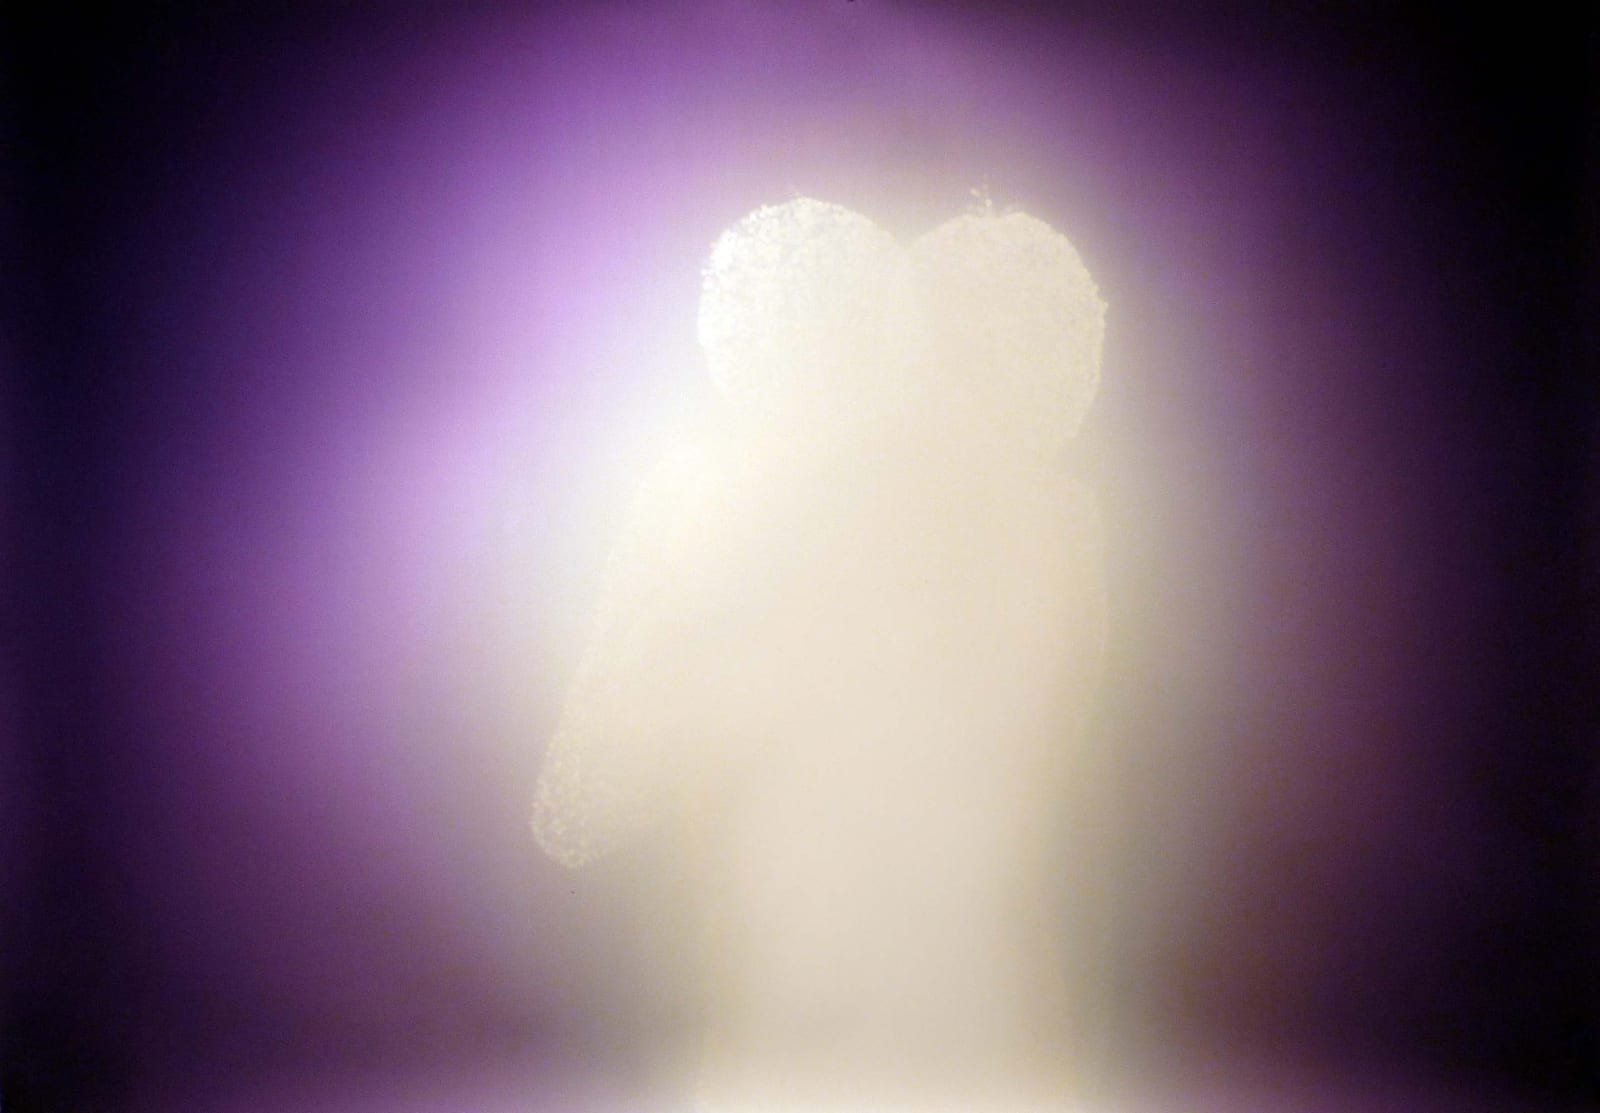 Christopher Bucklow Tetrarch, 1.28pm, 11th December silhouette of two people hugging in light through purple background